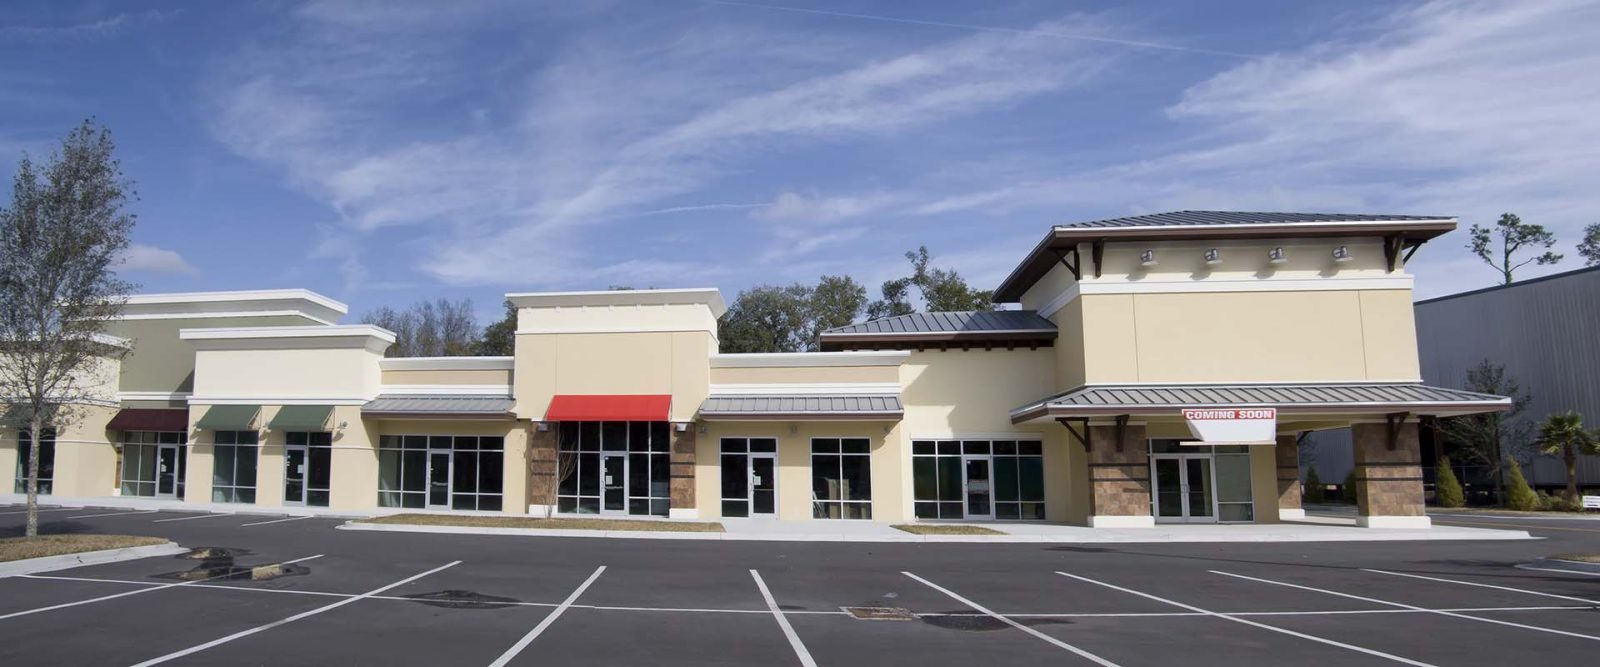 Retail Space for Lease by Faulkner Commercial Group